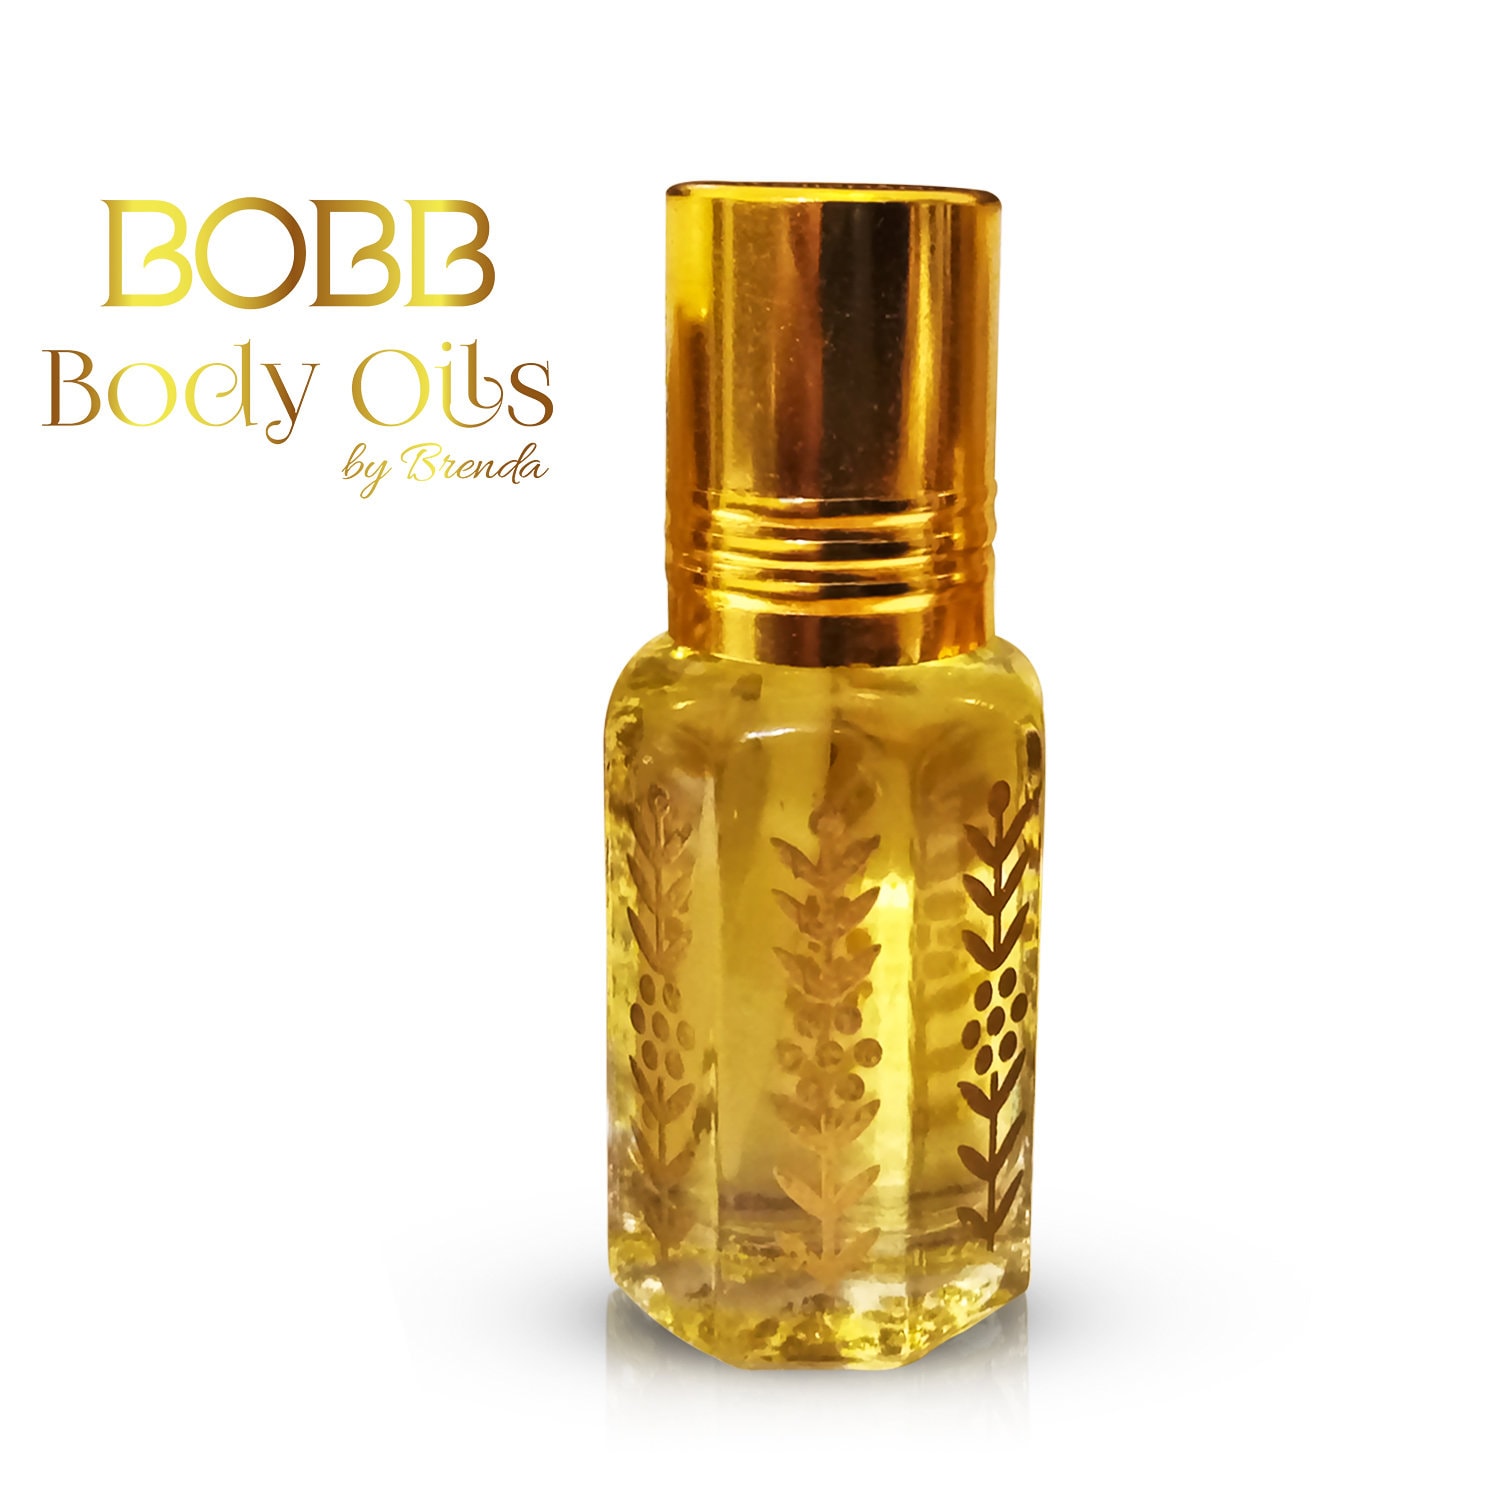 Concentrated Perfume Oils - Top Designer Body Oils & Imported Attars